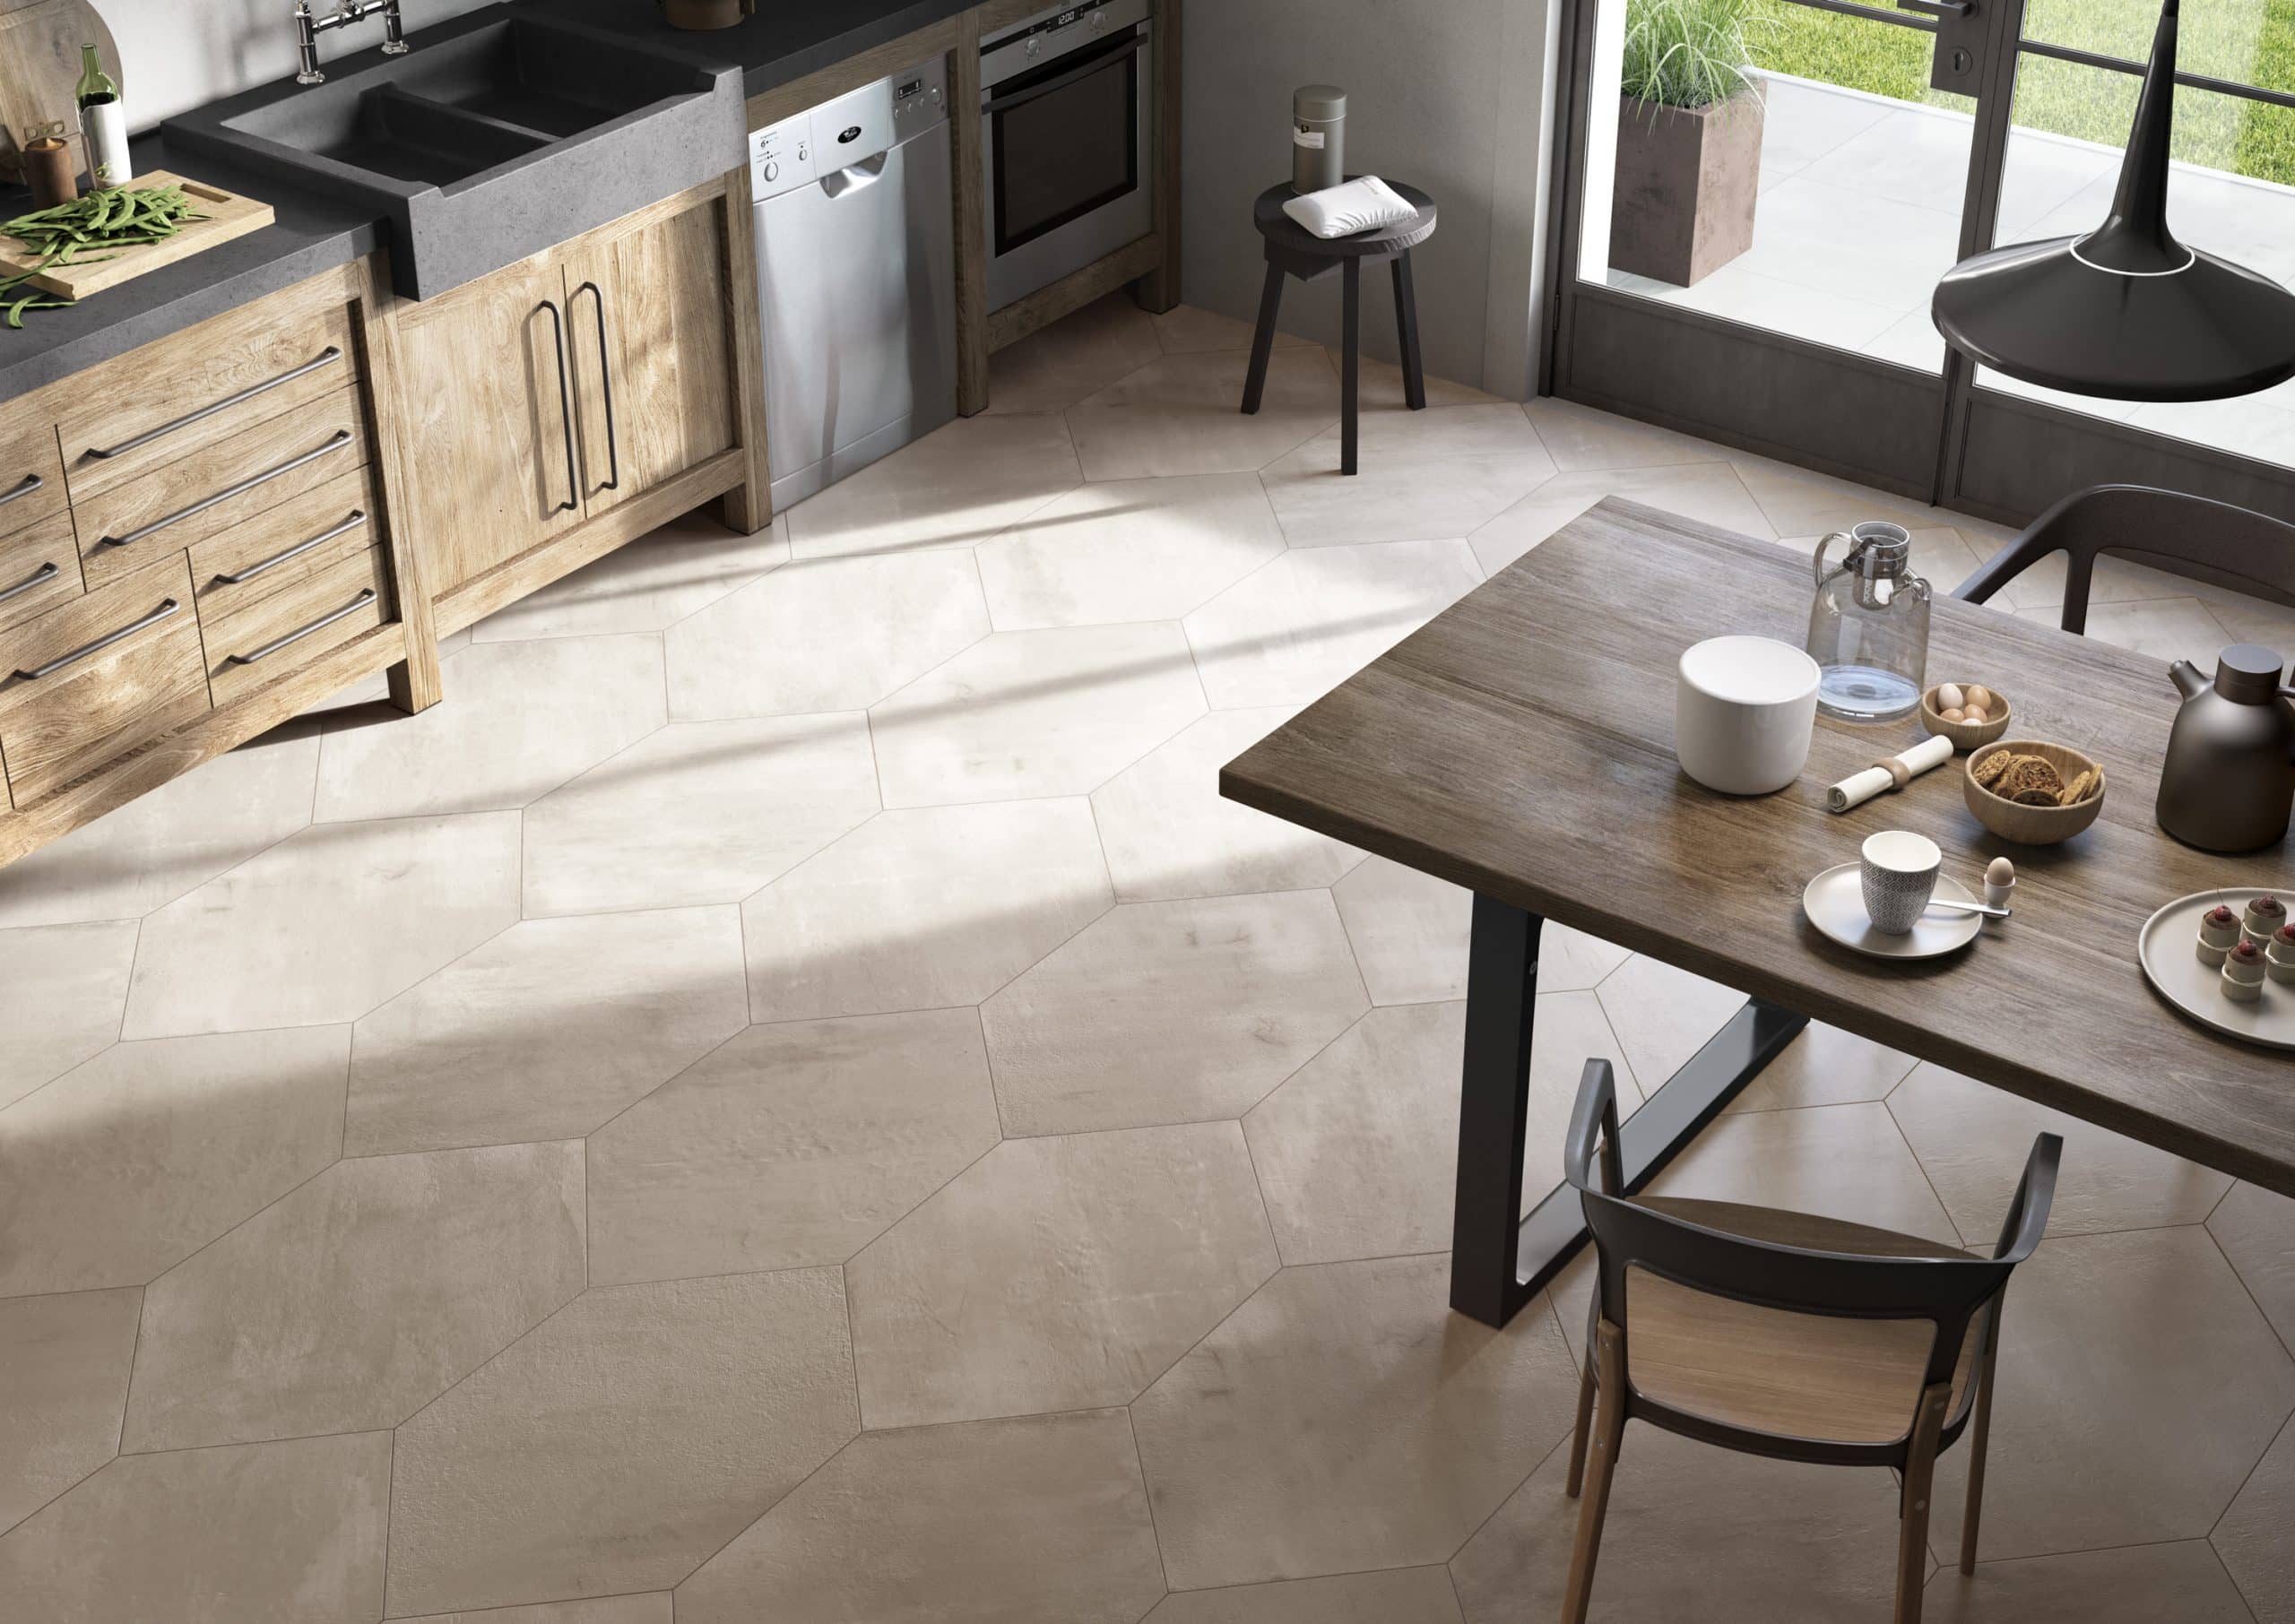 A stunningly designed Crema Marfil marble tile.